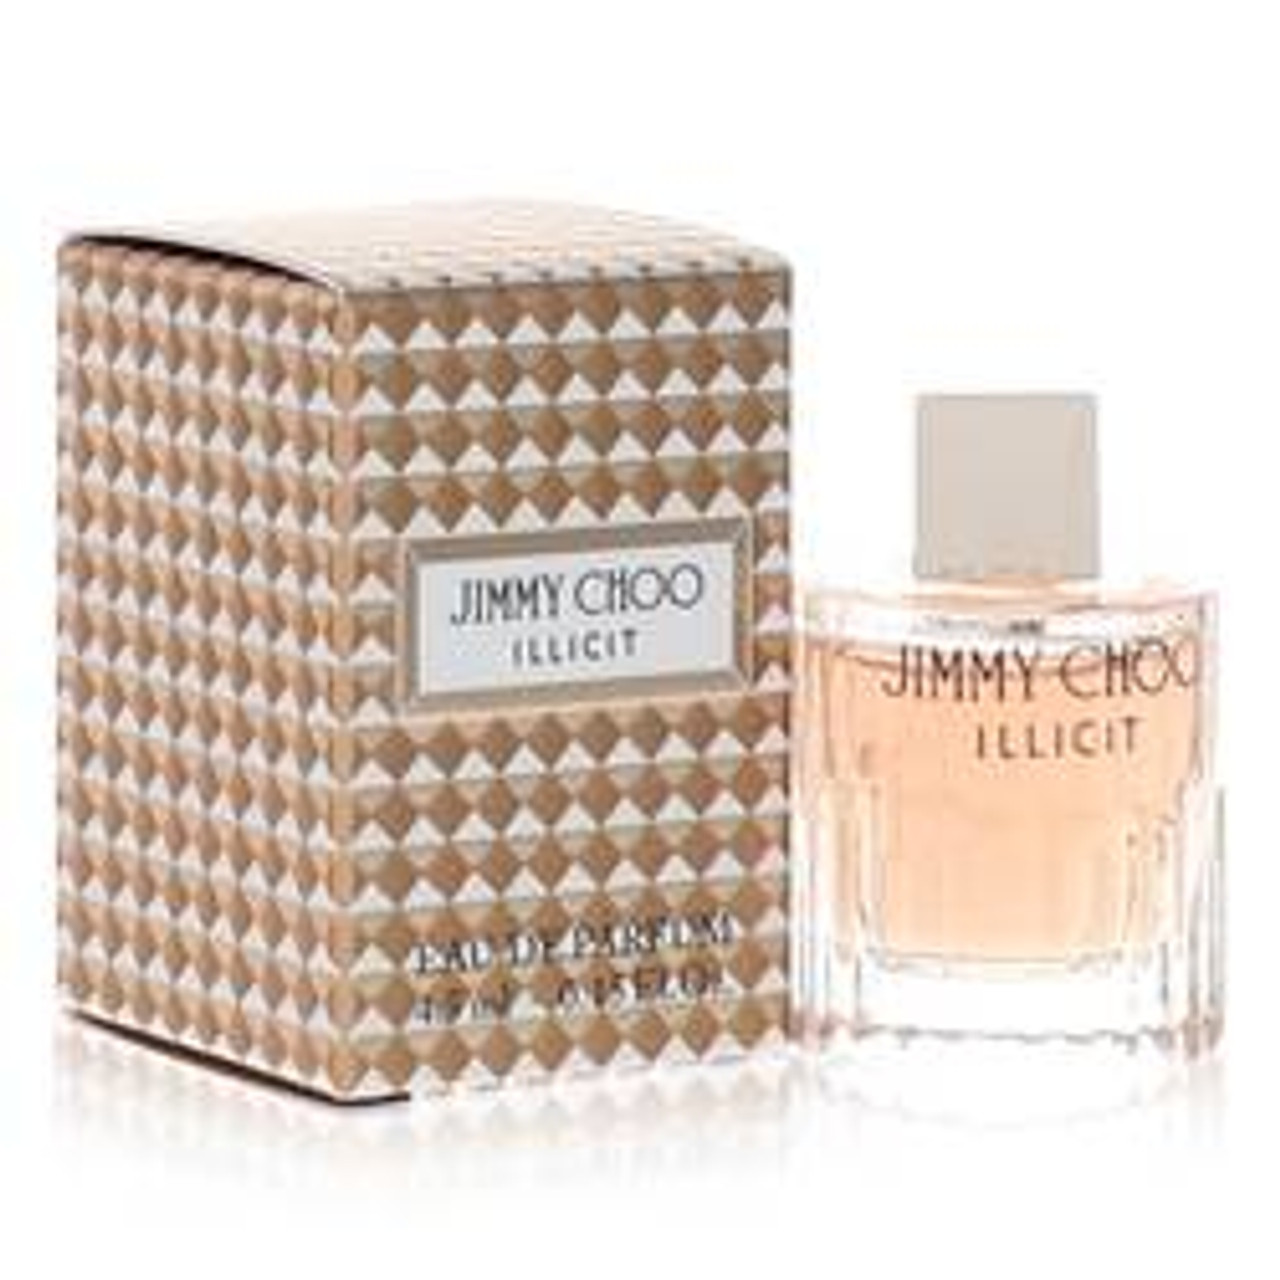 Jimmy Choo Illicit Perfume By Jimmy Choo Mini EDP 0.15 oz for Women - [From 23.00 - Choose pk Qty ] - *Ships from Miami